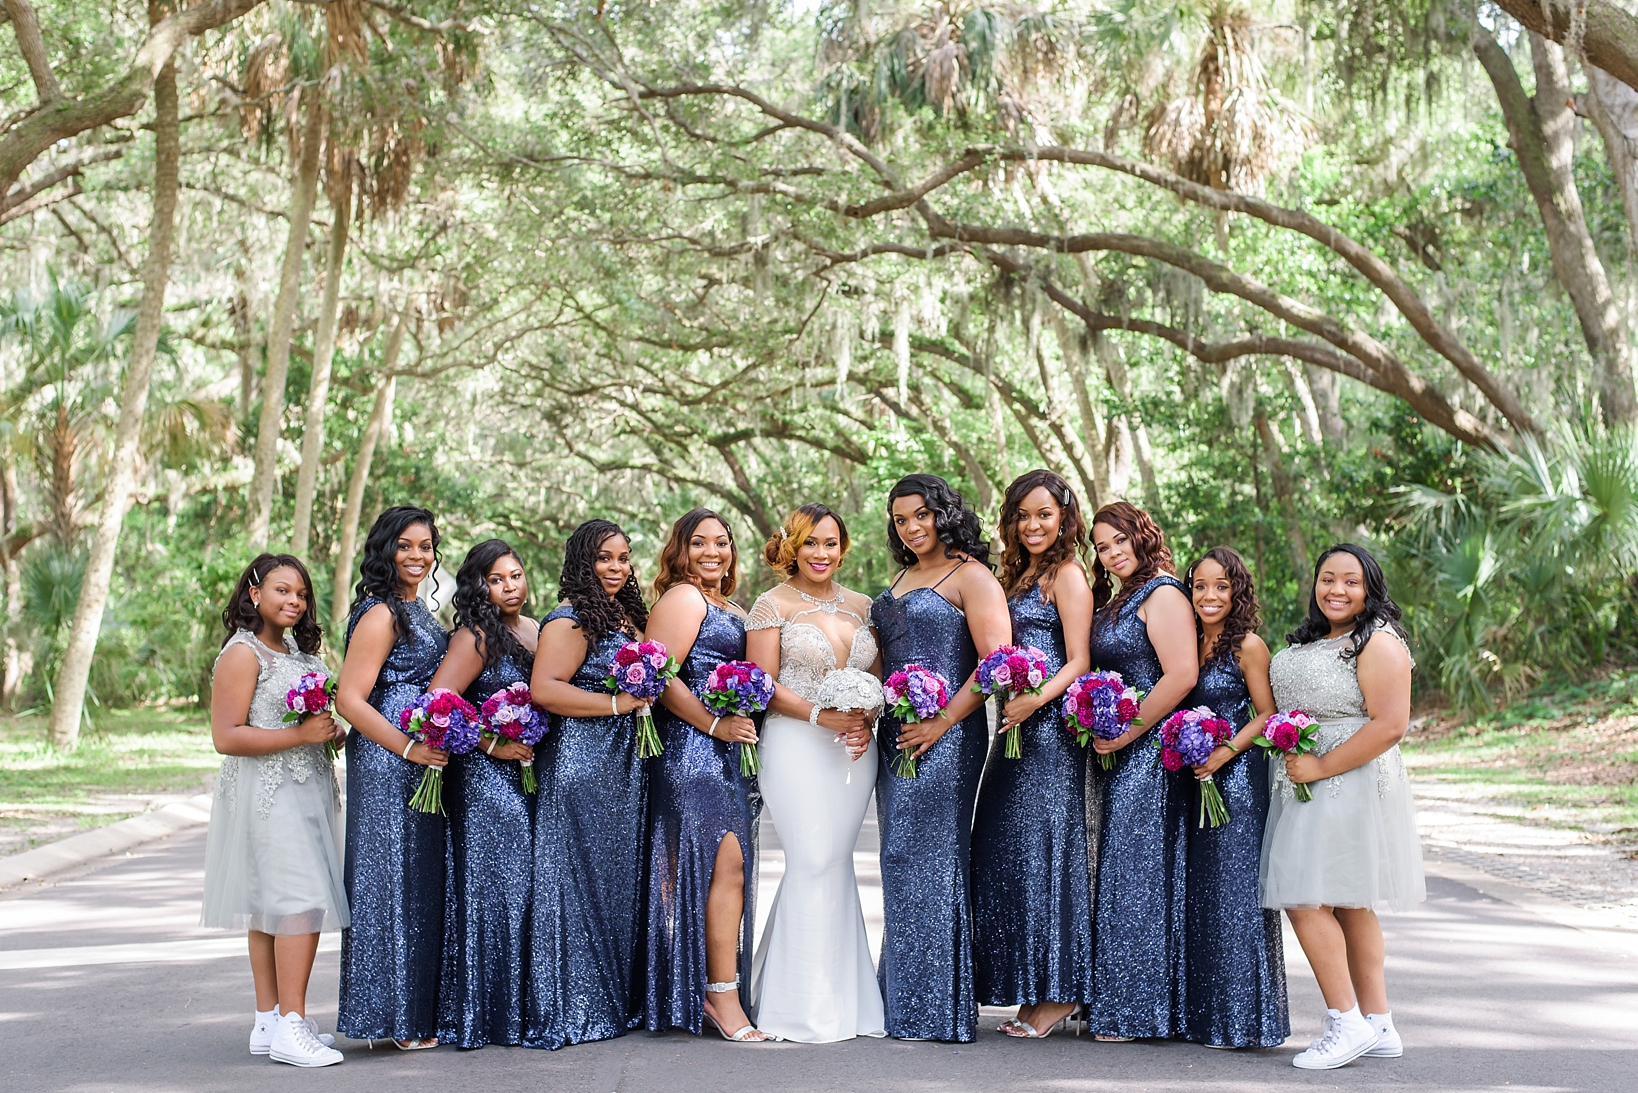 The Bride and her Bridesmaids pose under the giant oak trees of Safety Harbor, FL